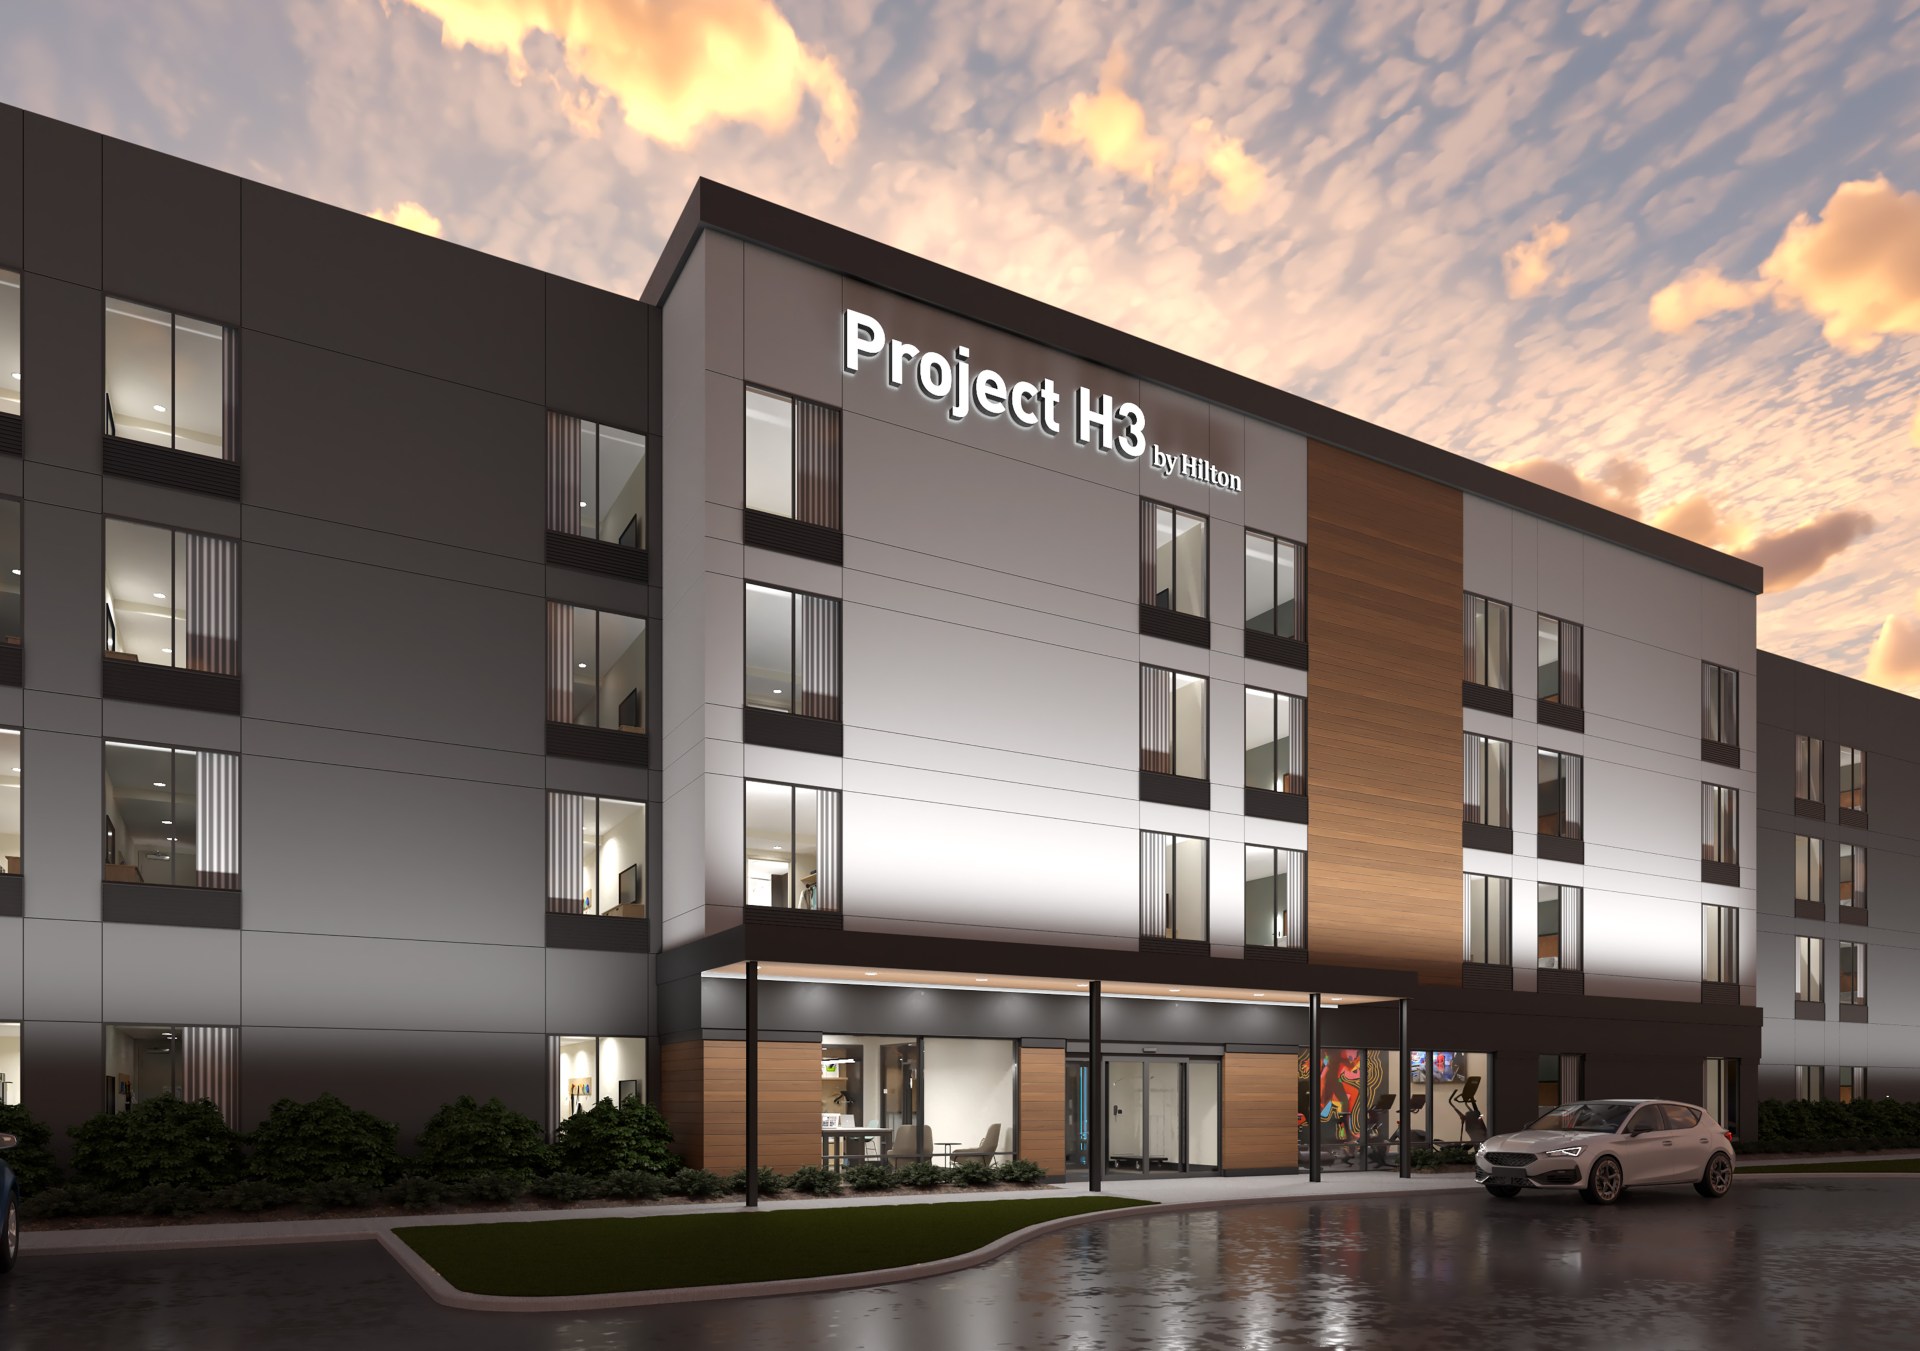 Project H3 by Hilton - Exterior